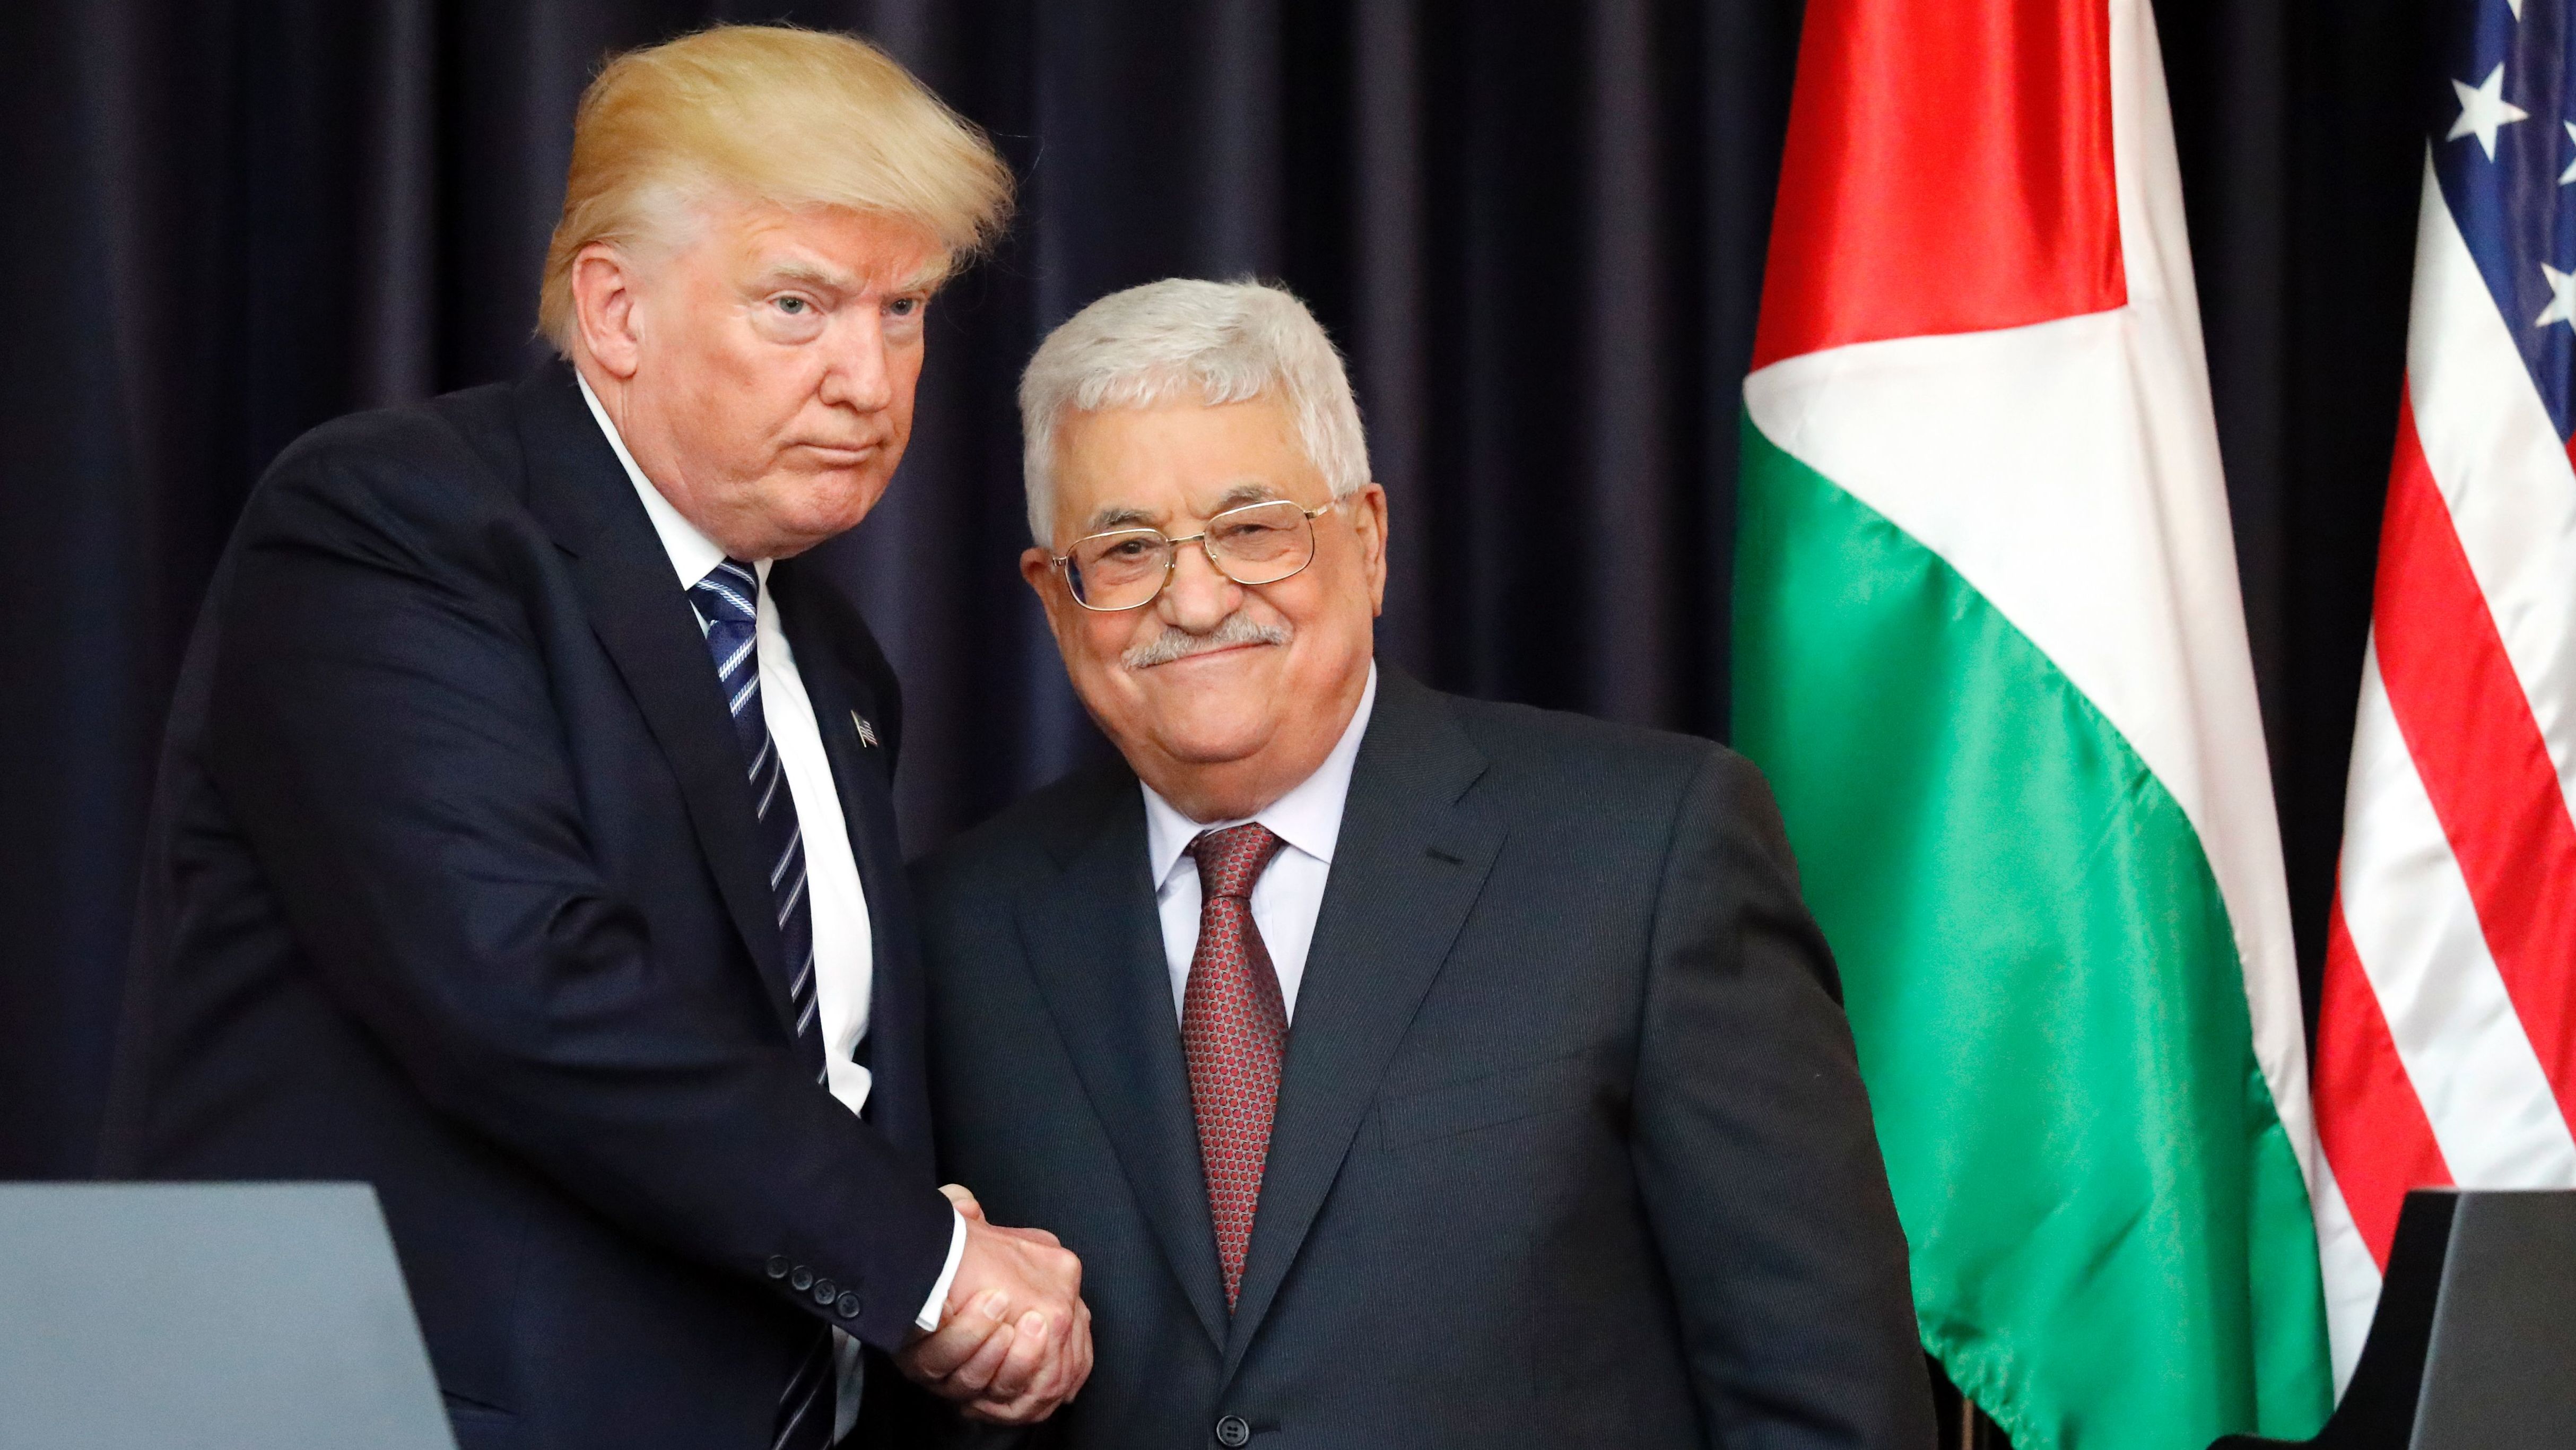 US President Donald Trump, left, and Palestinian leader Mahmoud Abbas shake hands at the presidential palace in  Bethlehem on May 23, 2017.